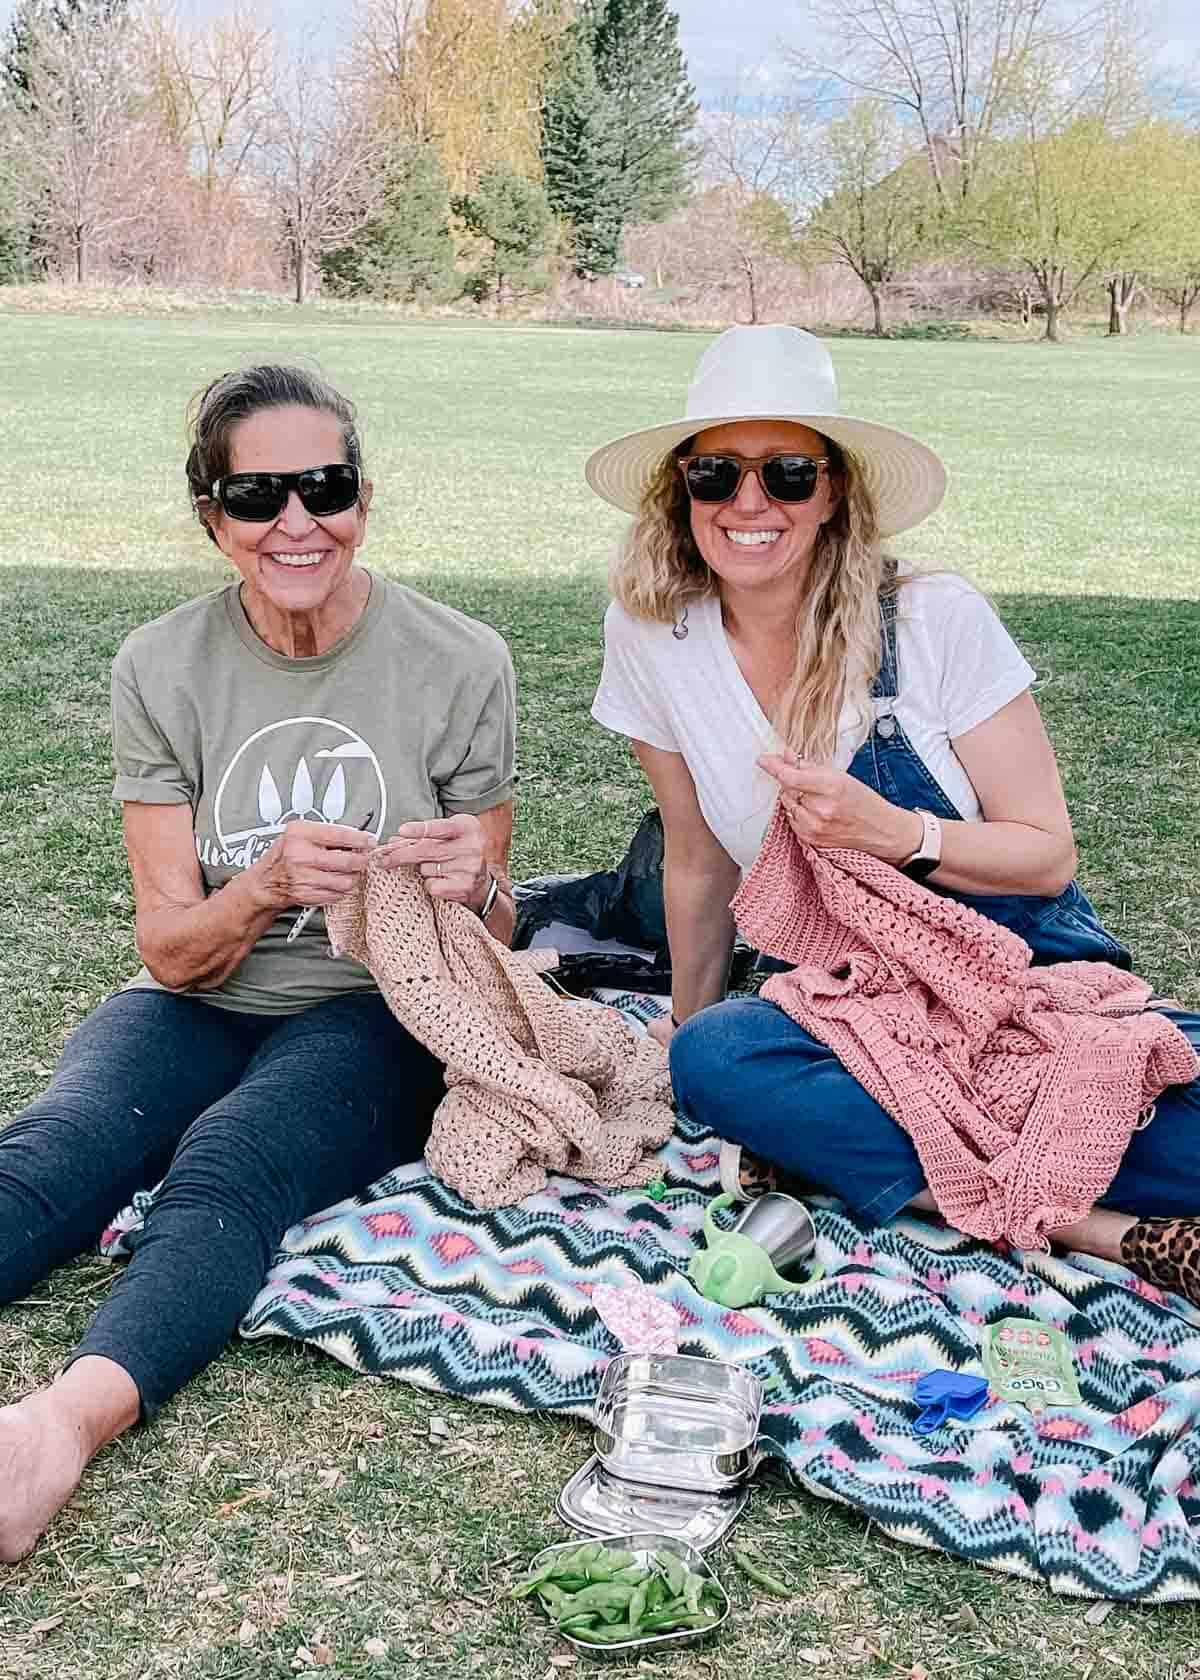 Jess Coppom (daughter) and Jacque Shank (mother) crocheting outside together.